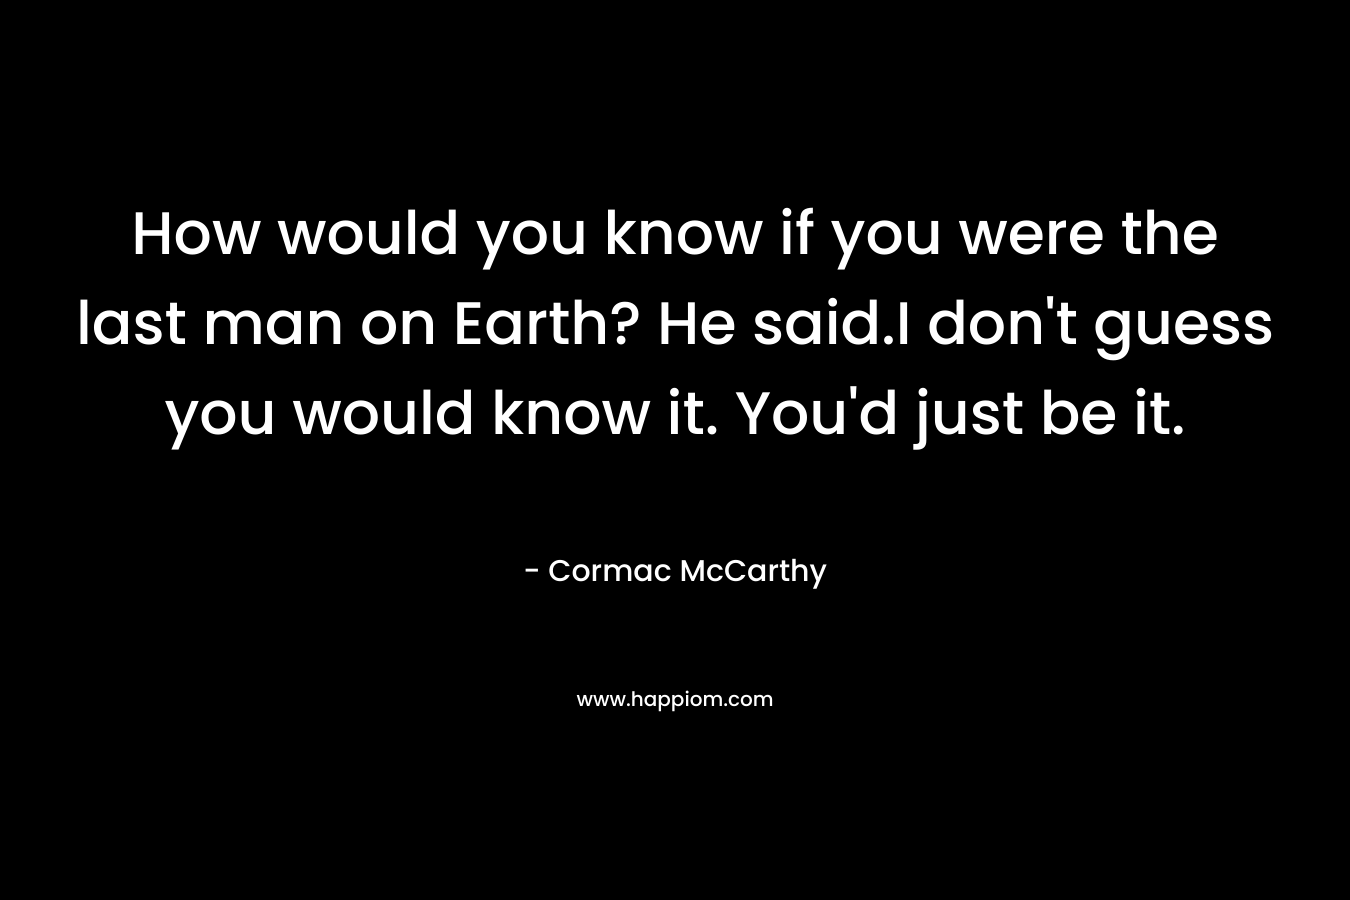 How would you know if you were the last man on Earth? He said.I don’t guess you would know it. You’d just be it. – Cormac McCarthy